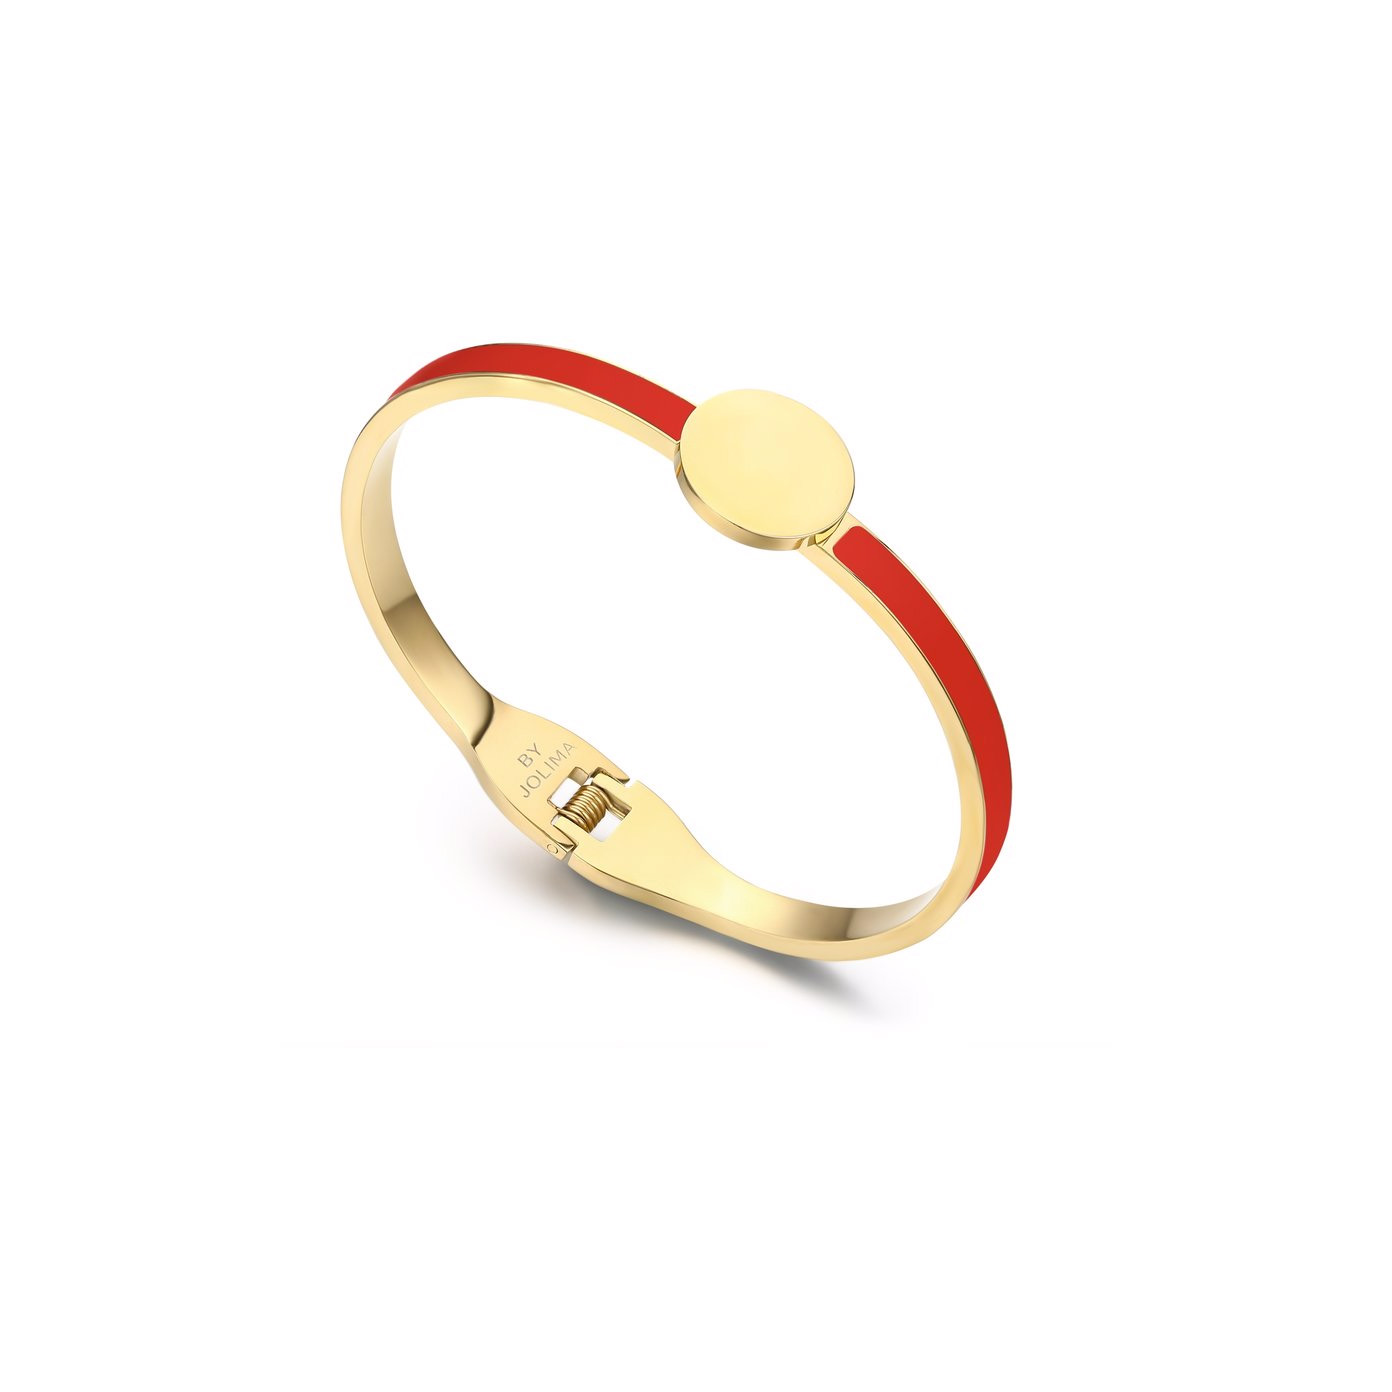 OEM/ODM Jewelry Bracelet Red Gold Customize Gold Sterling Silver Engrave Supplier